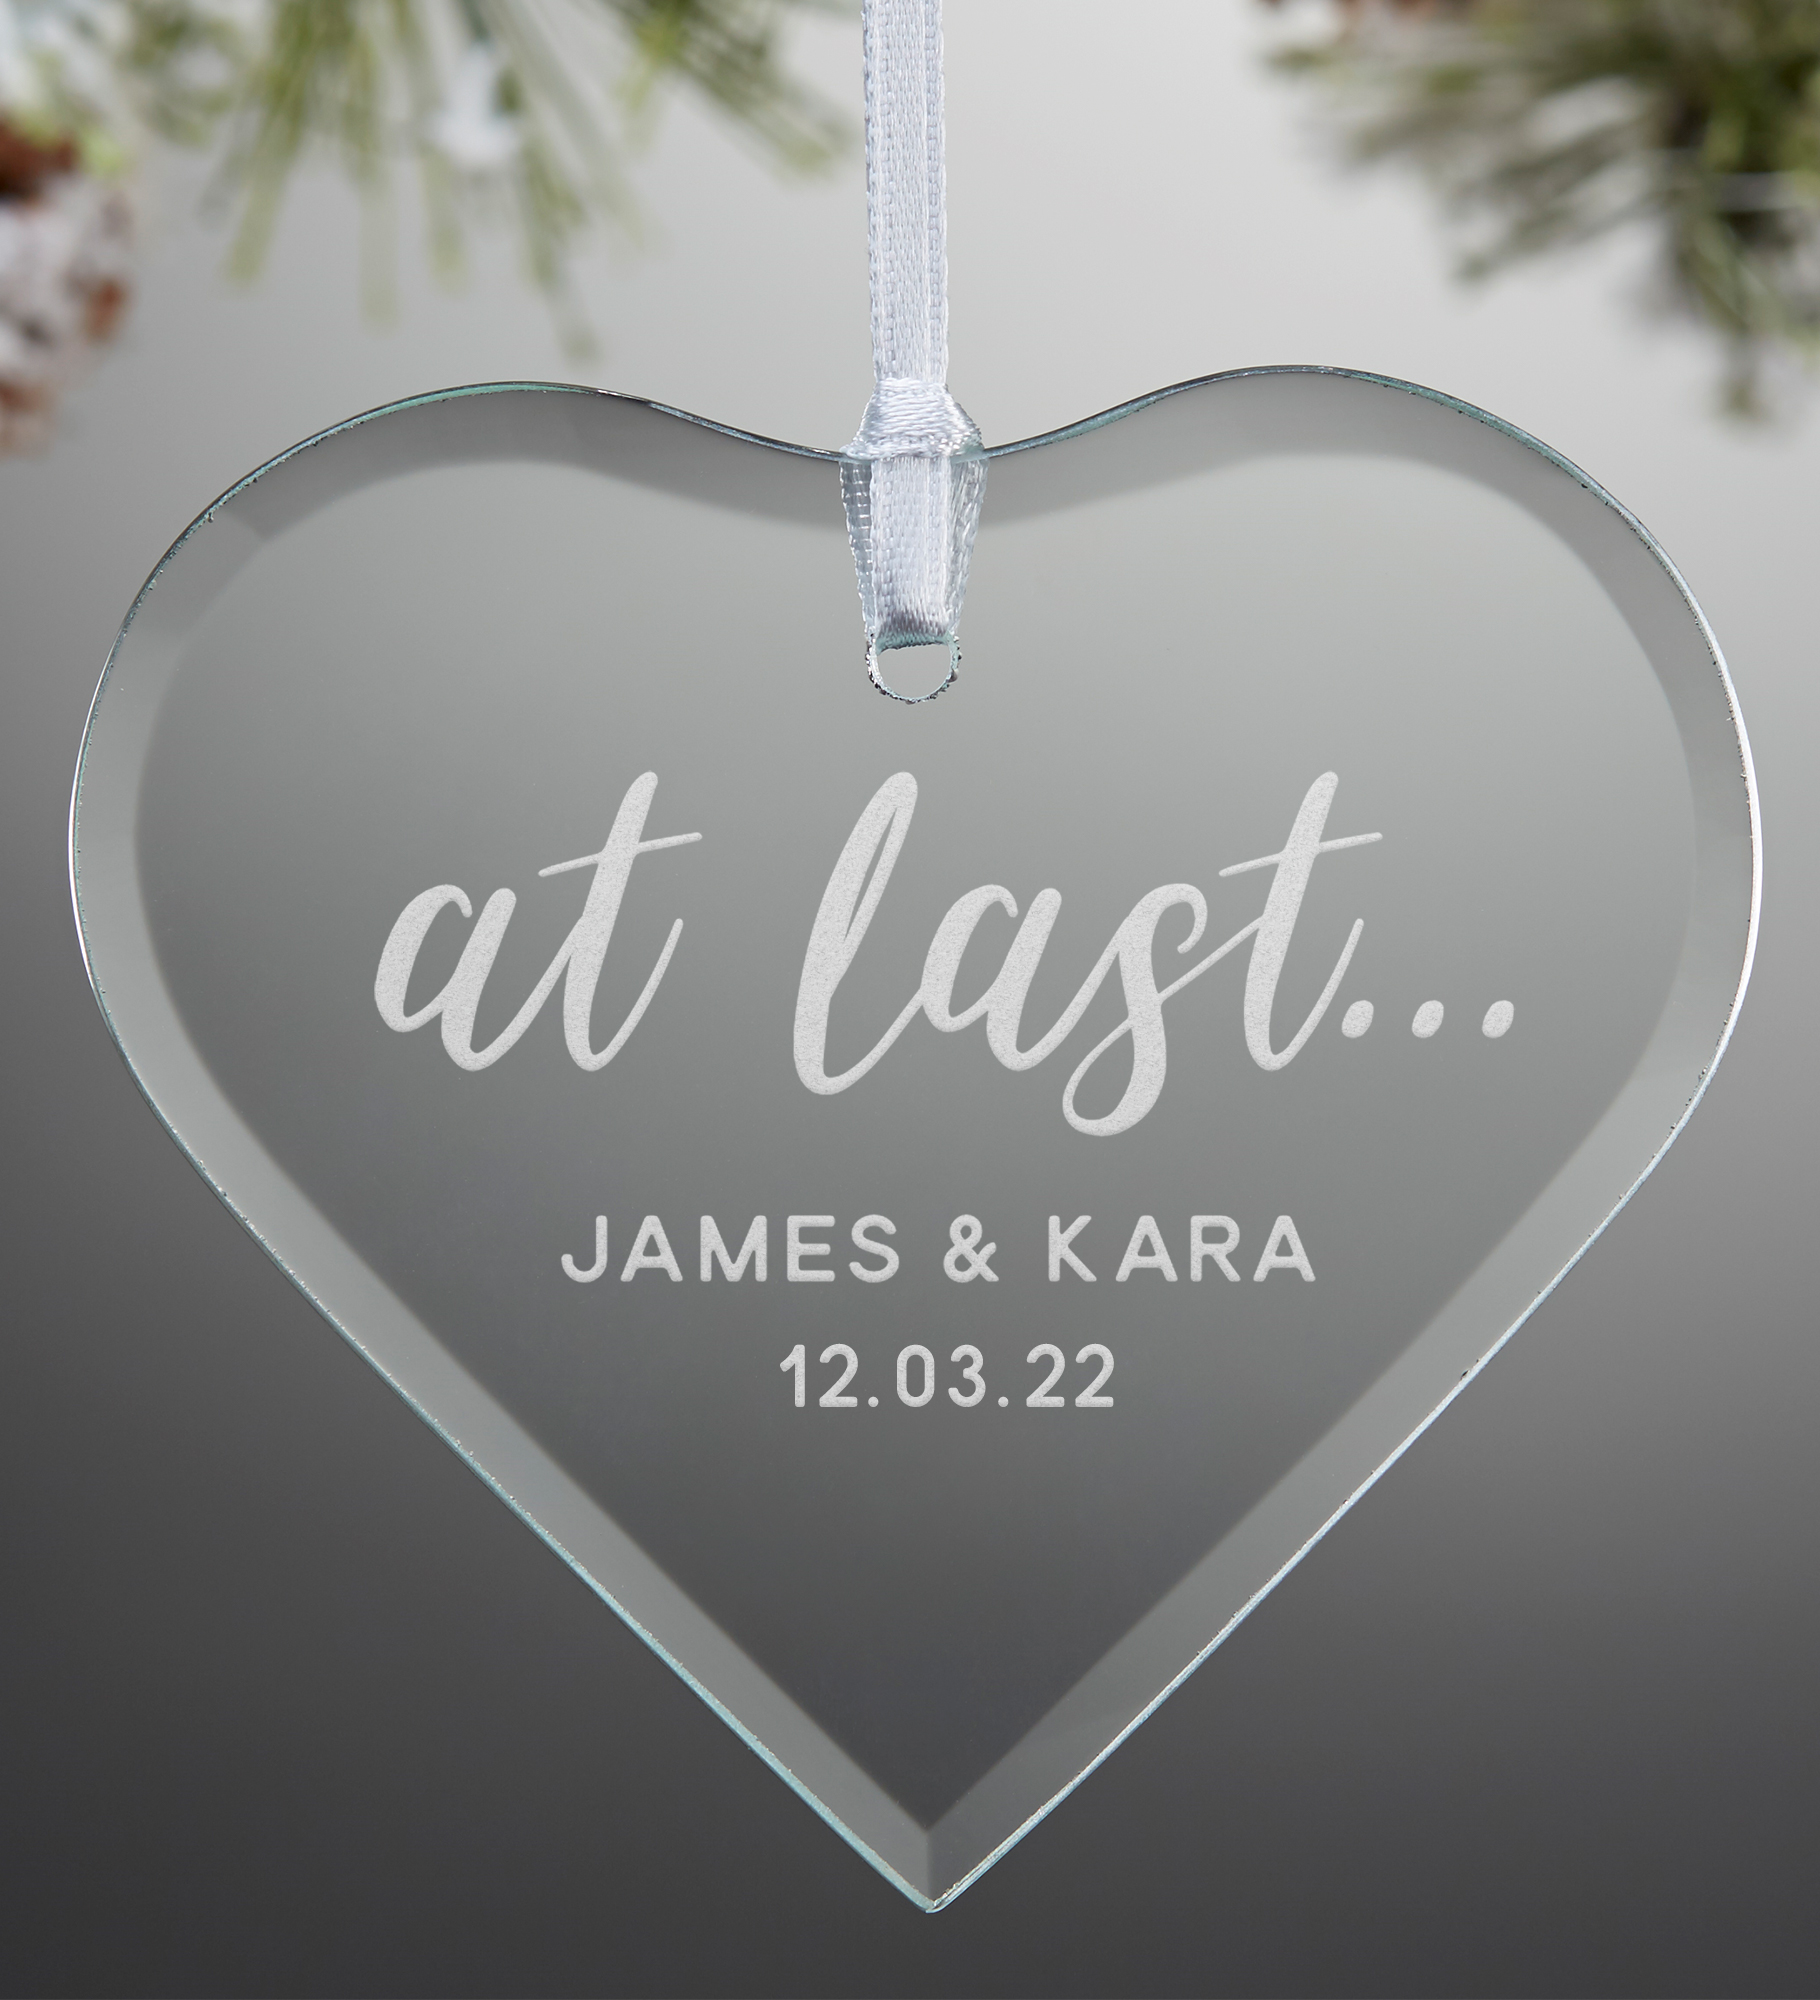 At Last... Personalized Wedding Heart Ornament